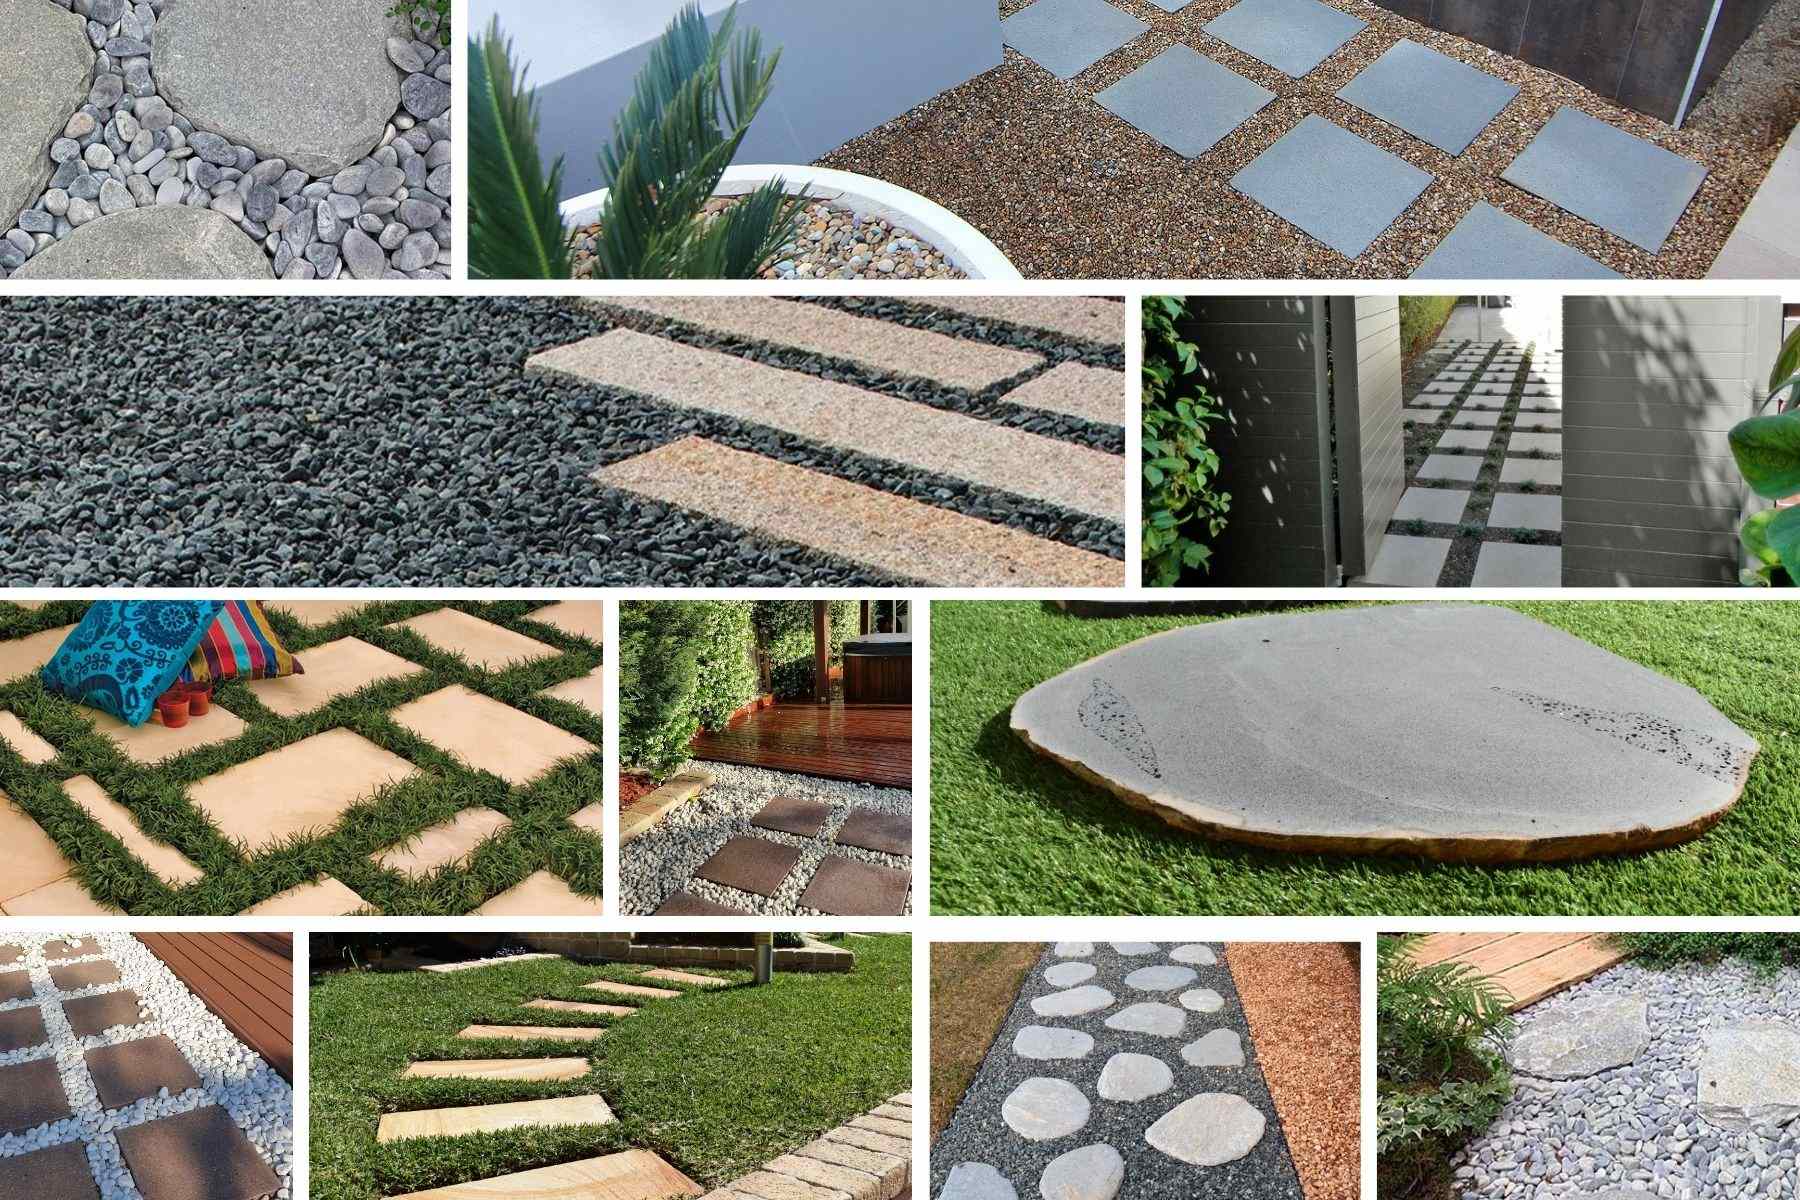 different types of steppings stones, natural stepping stones with natural pebbles and square concrete pavers used